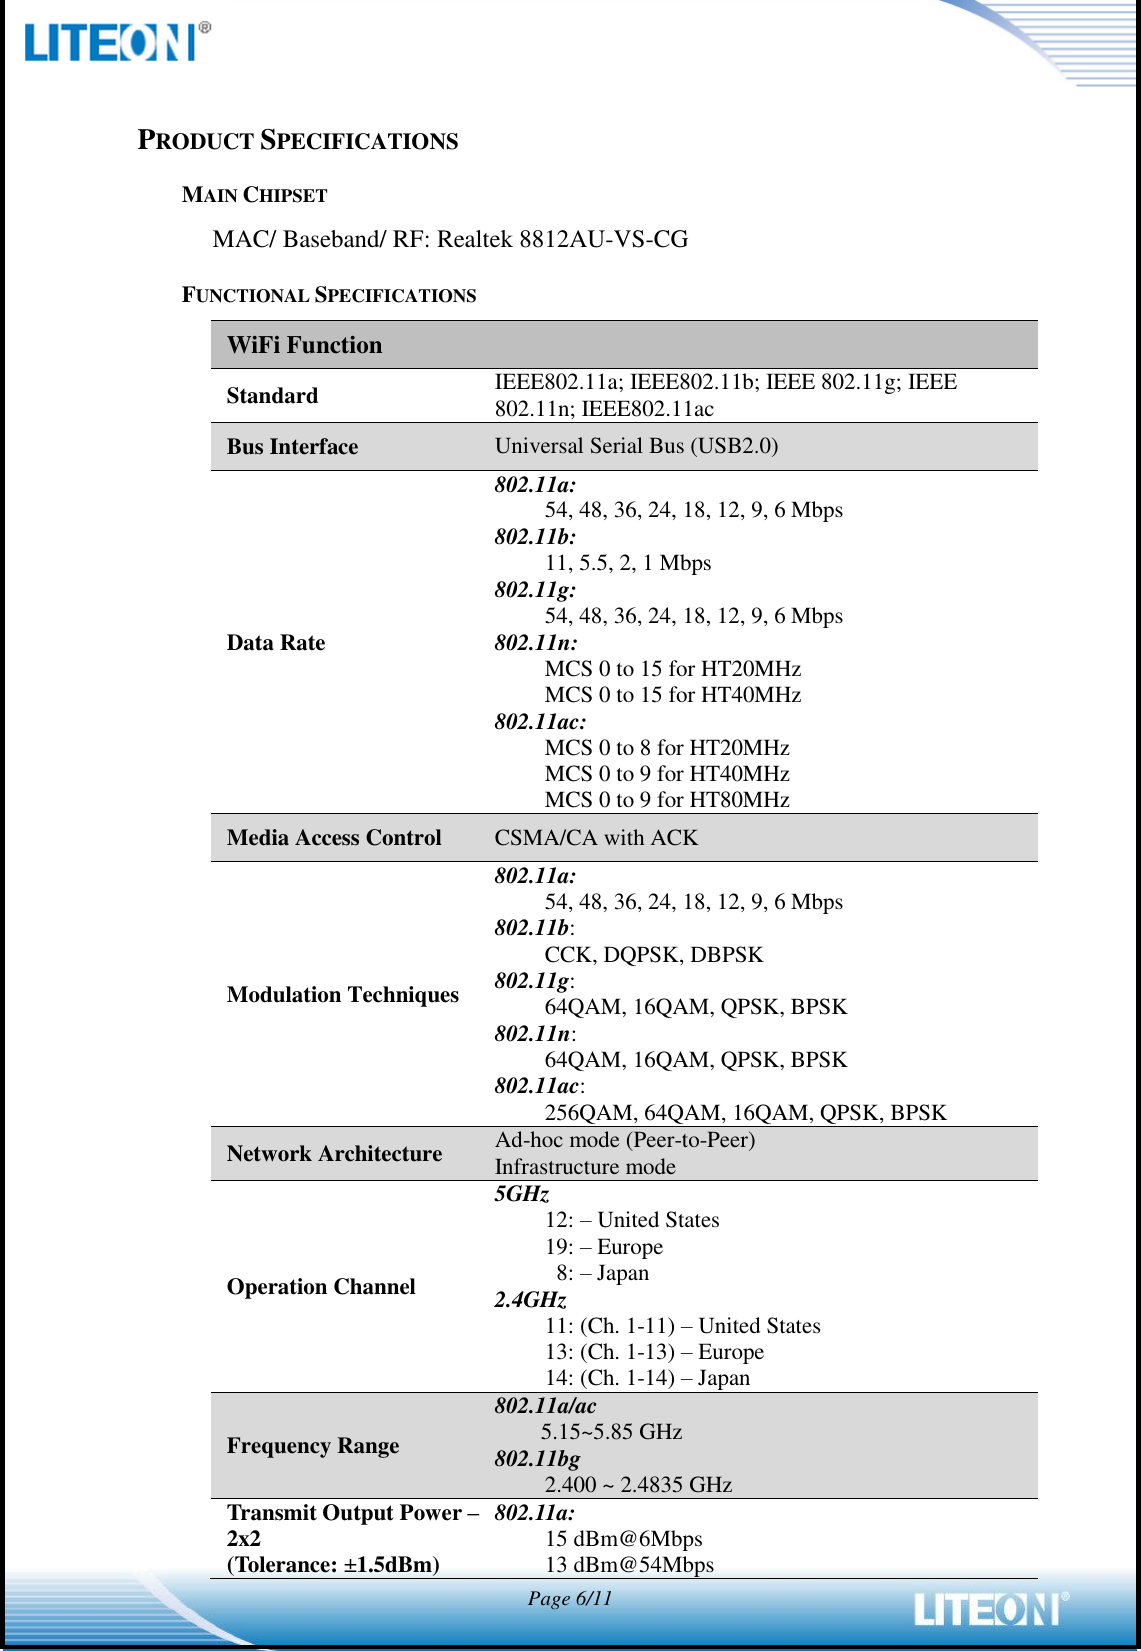  Page 6/11   PRODUCT SPECIFICATIONS MAIN CHIPSET MAC/ Baseband/ RF: Realtek 8812AU-VS-CG FUNCTIONAL SPECIFICATIONS WiFi Function Standard IEEE802.11a; IEEE802.11b; IEEE 802.11g; IEEE 802.11n; IEEE802.11ac Bus Interface Universal Serial Bus (USB2.0) Data Rate 802.11a: 54, 48, 36, 24, 18, 12, 9, 6 Mbps 802.11b: 11, 5.5, 2, 1 Mbps 802.11g: 54, 48, 36, 24, 18, 12, 9, 6 Mbps 802.11n: MCS 0 to 15 for HT20MHz MCS 0 to 15 for HT40MHz 802.11ac: MCS 0 to 8 for HT20MHz MCS 0 to 9 for HT40MHz MCS 0 to 9 for HT80MHz Media Access Control CSMA/CA with ACK Modulation Techniques 802.11a: 54, 48, 36, 24, 18, 12, 9, 6 Mbps 802.11b: CCK, DQPSK, DBPSK 802.11g: 64QAM, 16QAM, QPSK, BPSK 802.11n: 64QAM, 16QAM, QPSK, BPSK 802.11ac: 256QAM, 64QAM, 16QAM, QPSK, BPSK Network Architecture Ad-hoc mode (Peer-to-Peer) Infrastructure mode Operation Channel 5GHz 12: – United States 19: – Europe 8: – Japan 2.4GHz 11: (Ch. 1-11) – United States 13: (Ch. 1-13) – Europe 14: (Ch. 1-14) – Japan Frequency Range 802.11a/ac     5.15~5.85 GHz 802.11bg 2.400 ~ 2.4835 GHz Transmit Output Power – 2x2 (Tolerance: ±1.5dBm) 802.11a: 15 dBm@6Mbps 13 dBm@54Mbps 